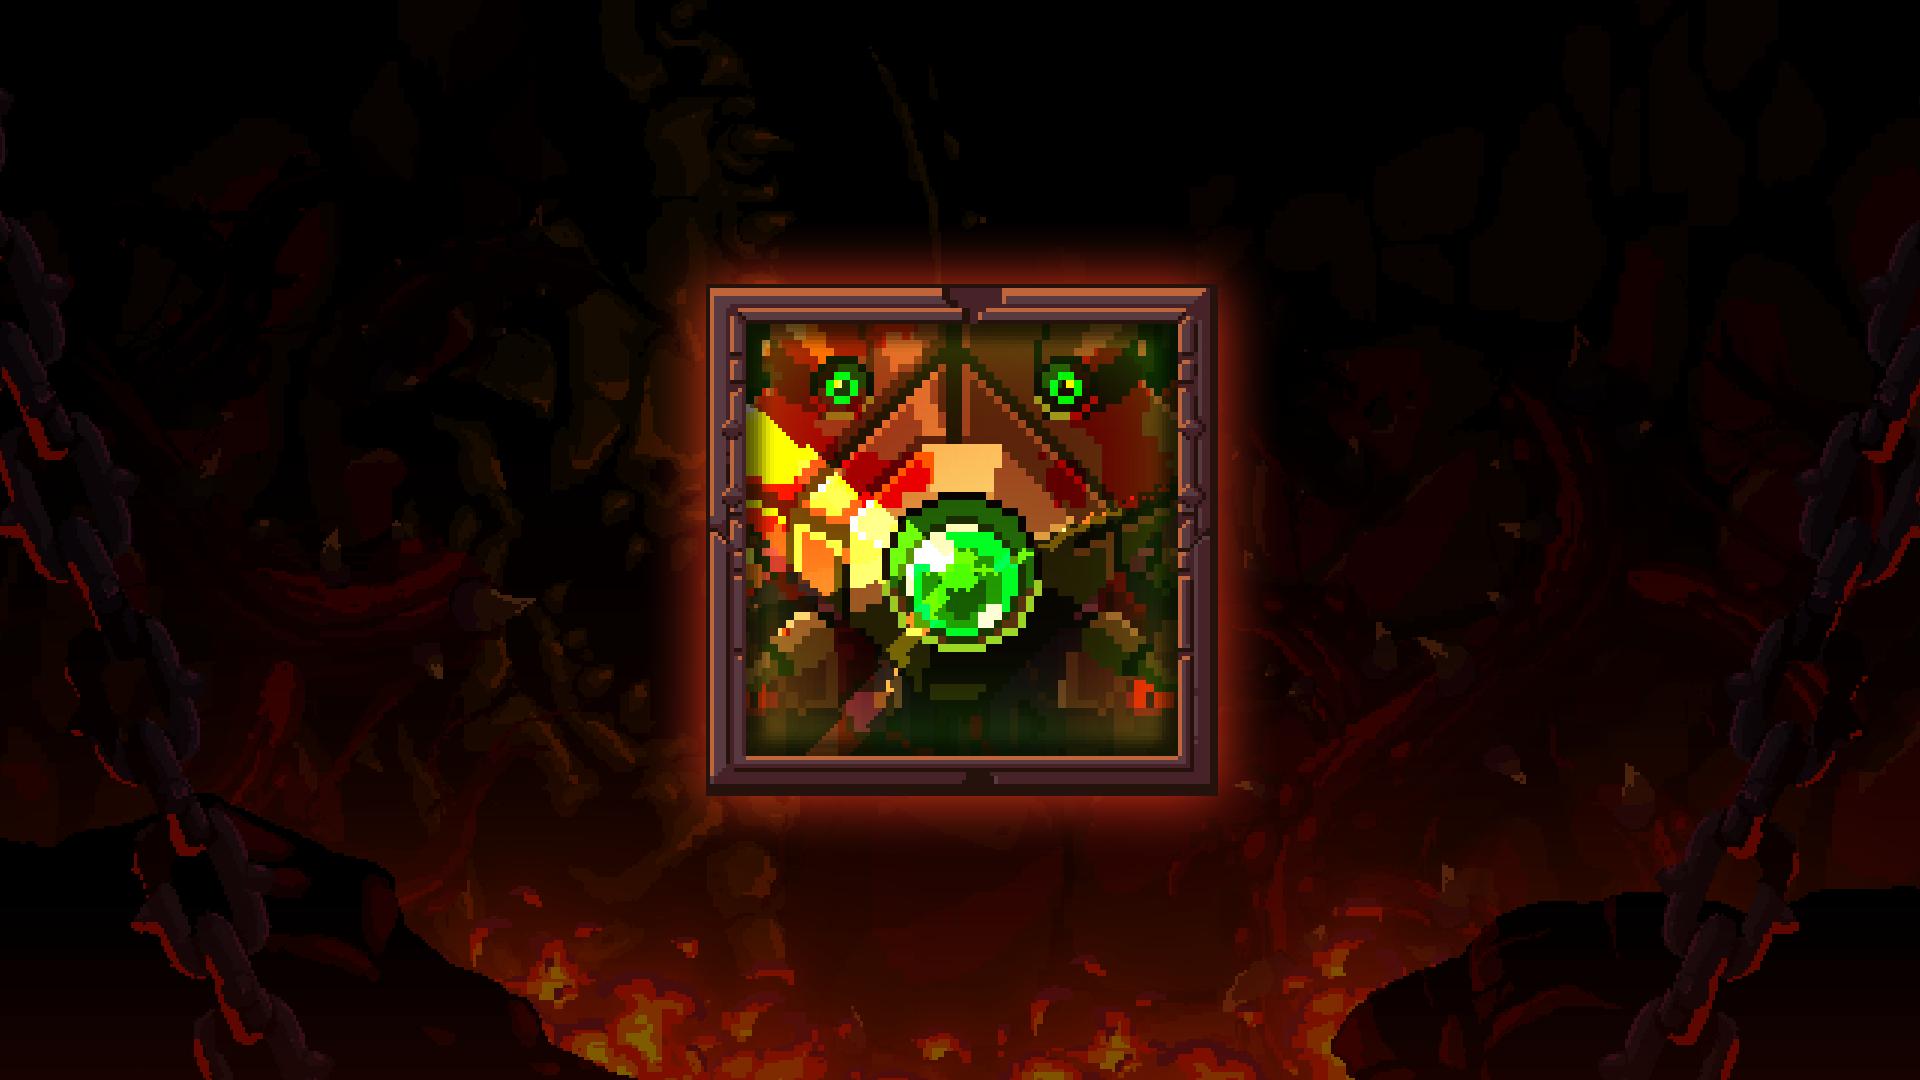 Icon for Lair Dominator